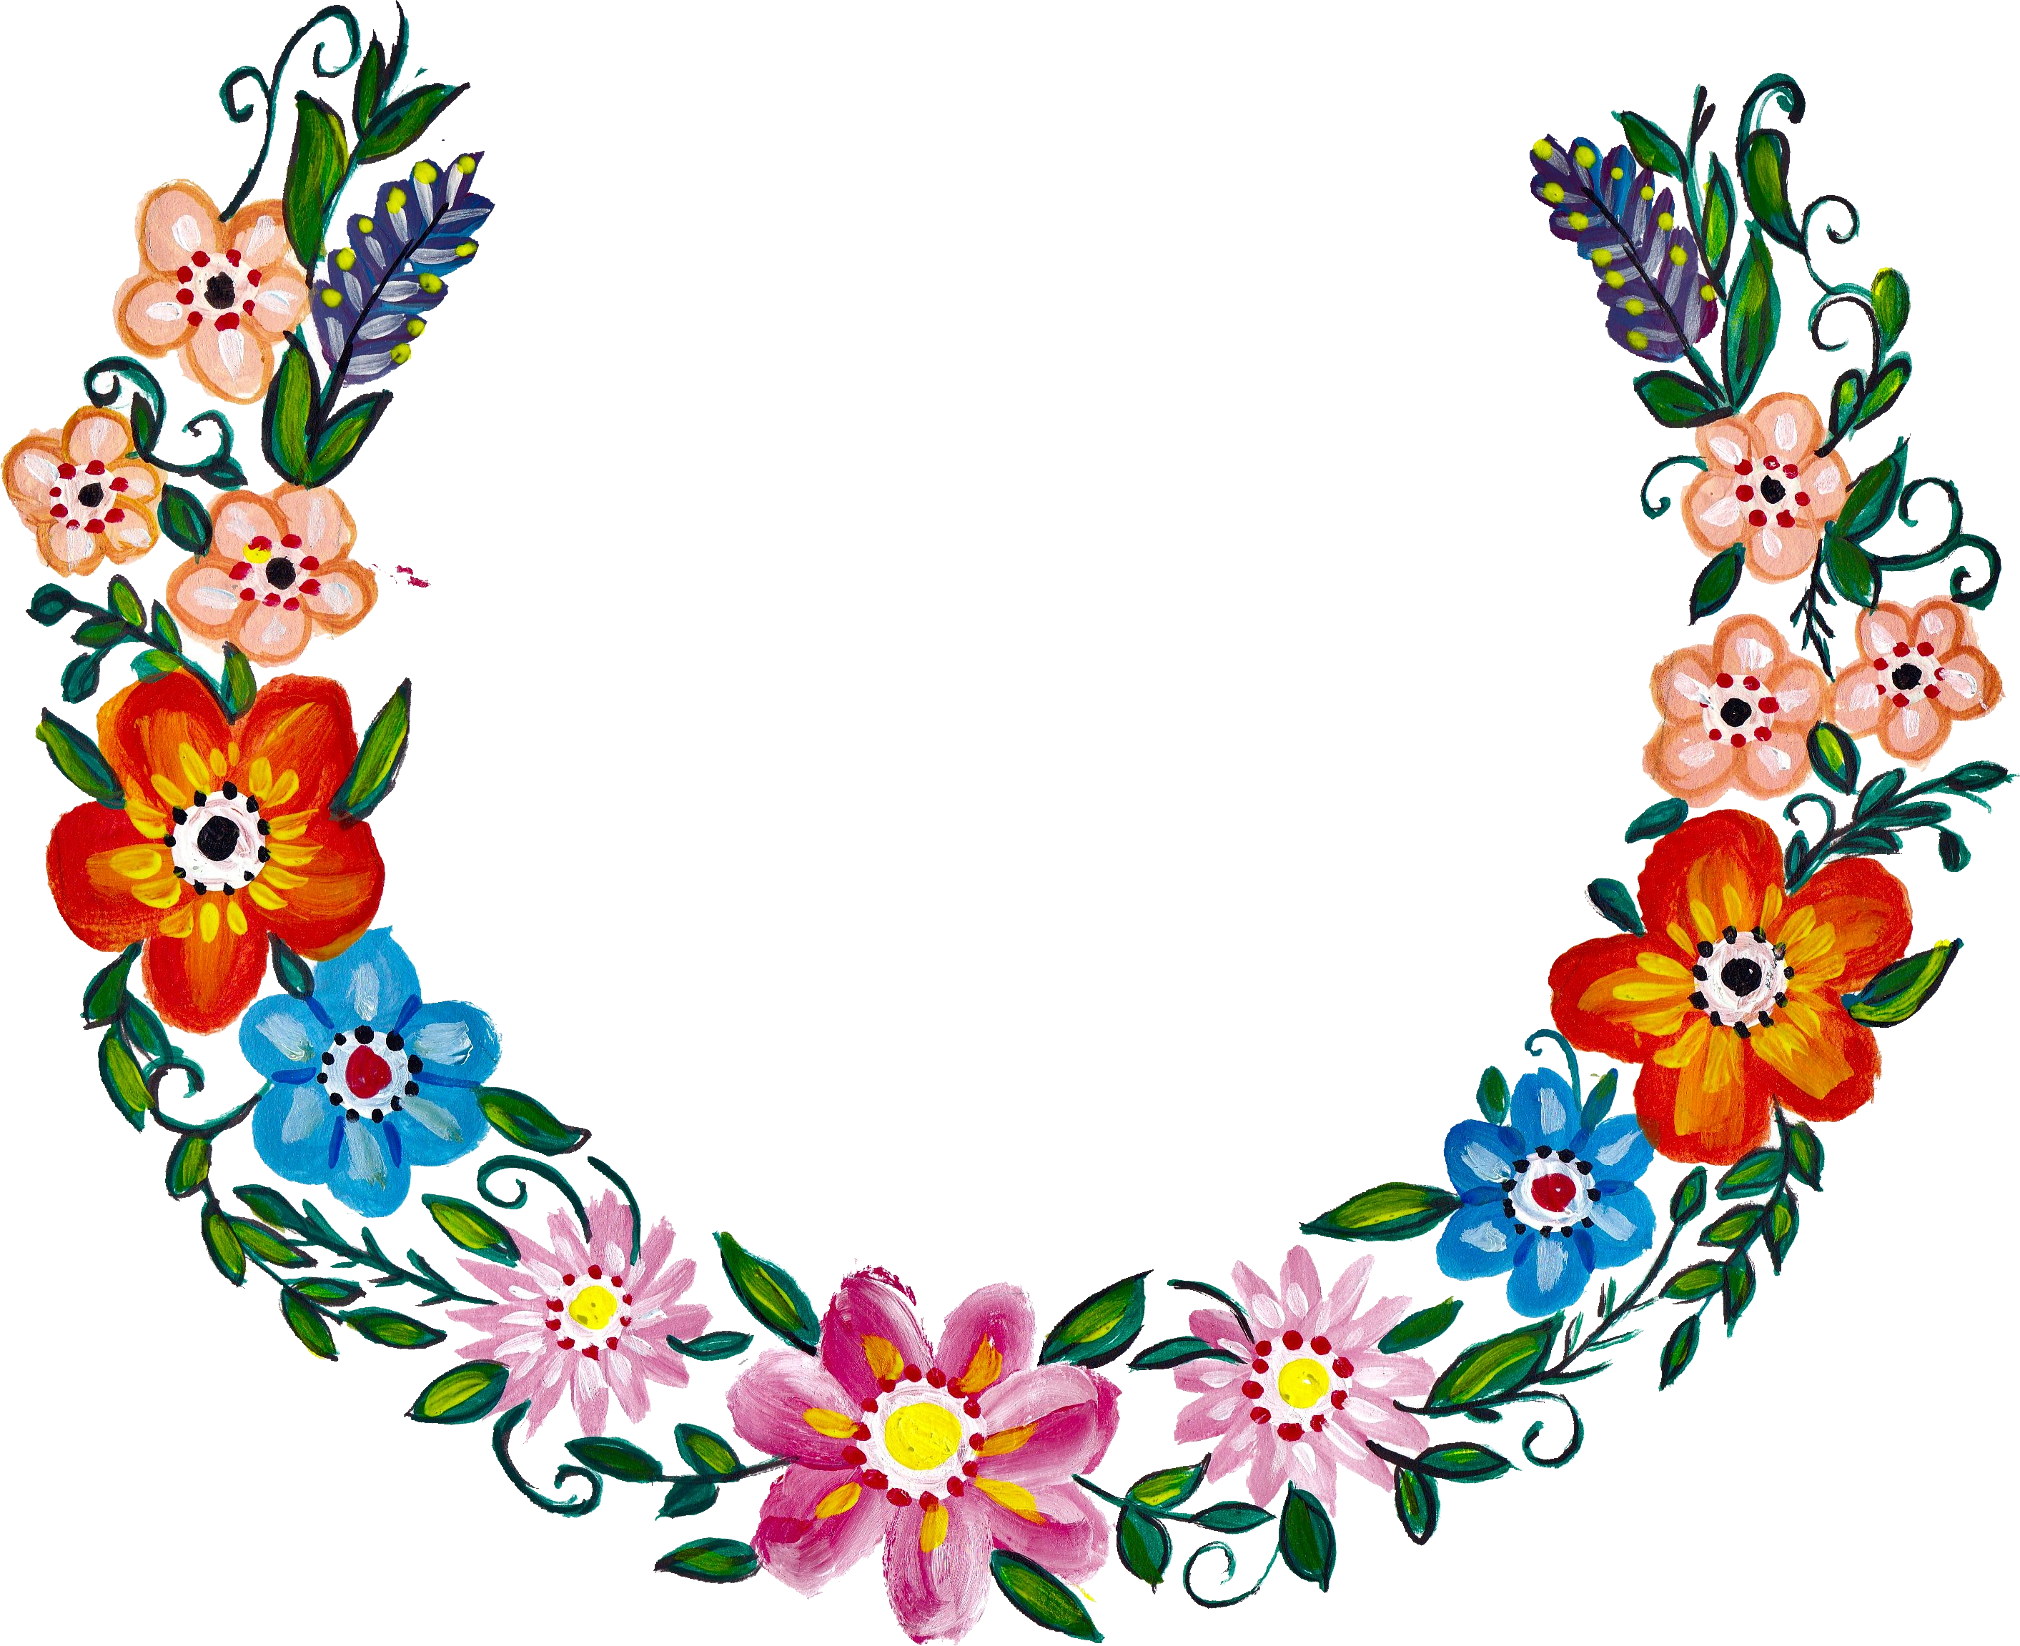 A Painted Flower Wreath On A Black Background